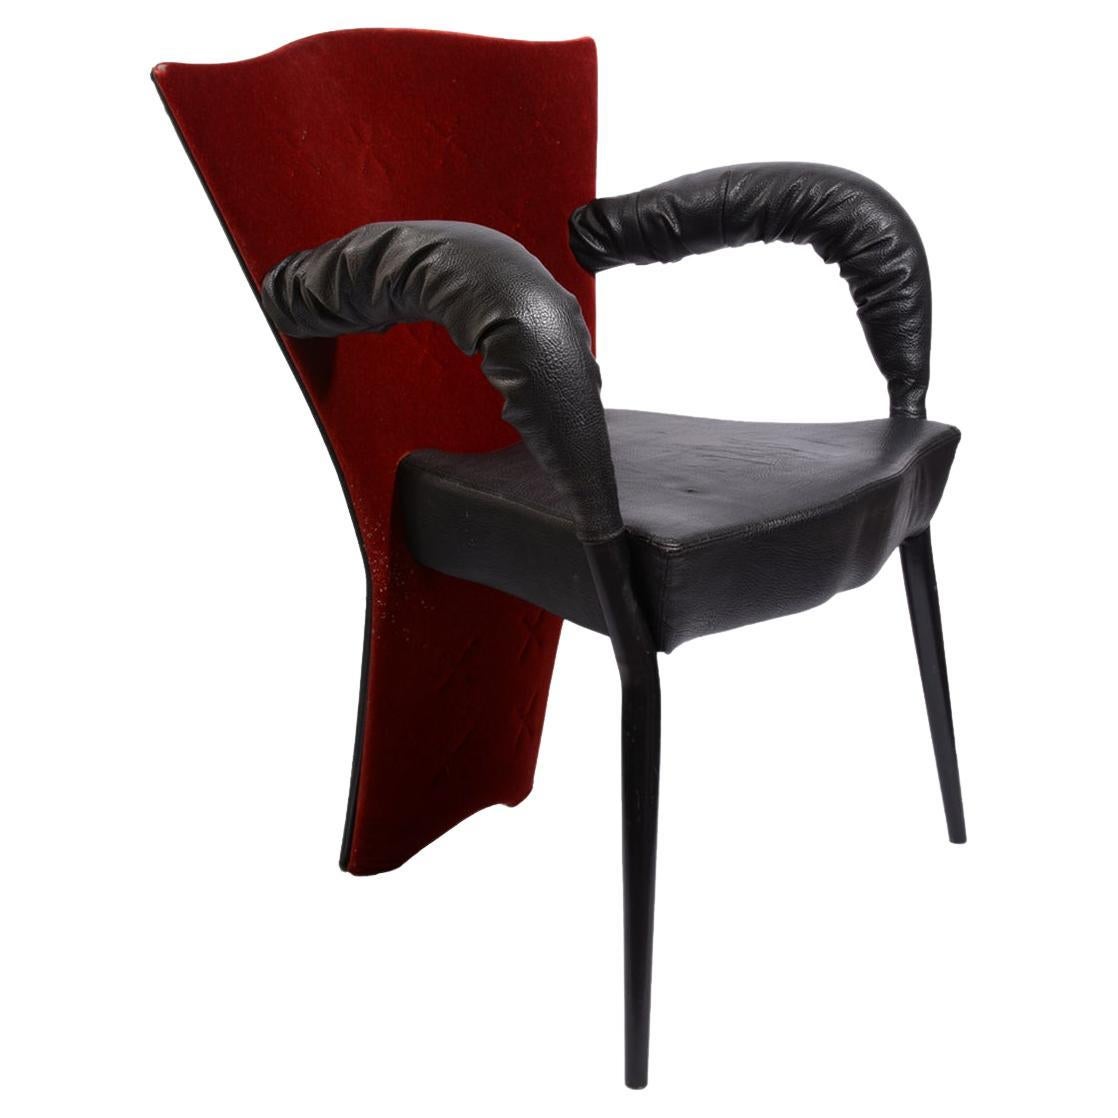 Andre T Chair by Borek Sipek for Scarabas, 1990s